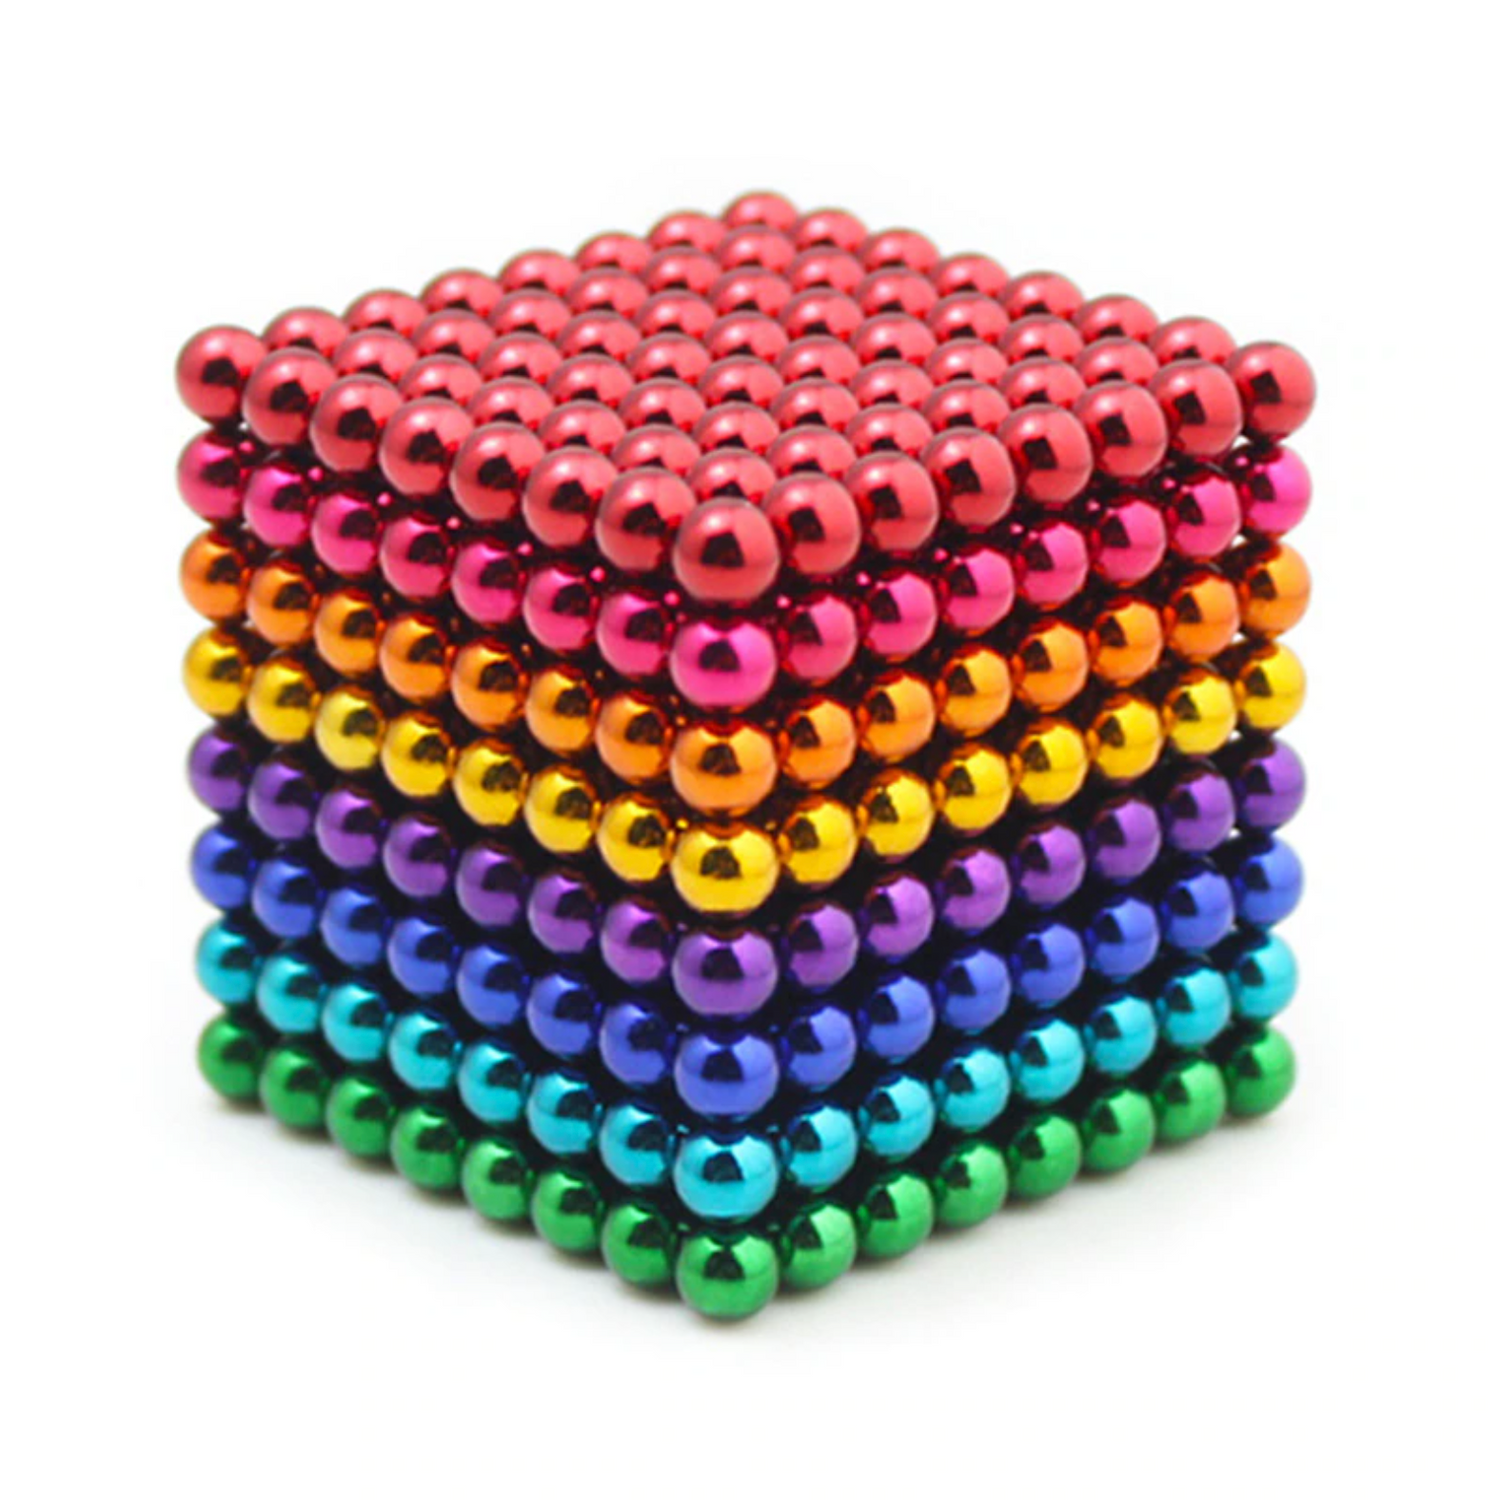 1000 Pcs 5mm Magnetic Balls for Stress Relief 